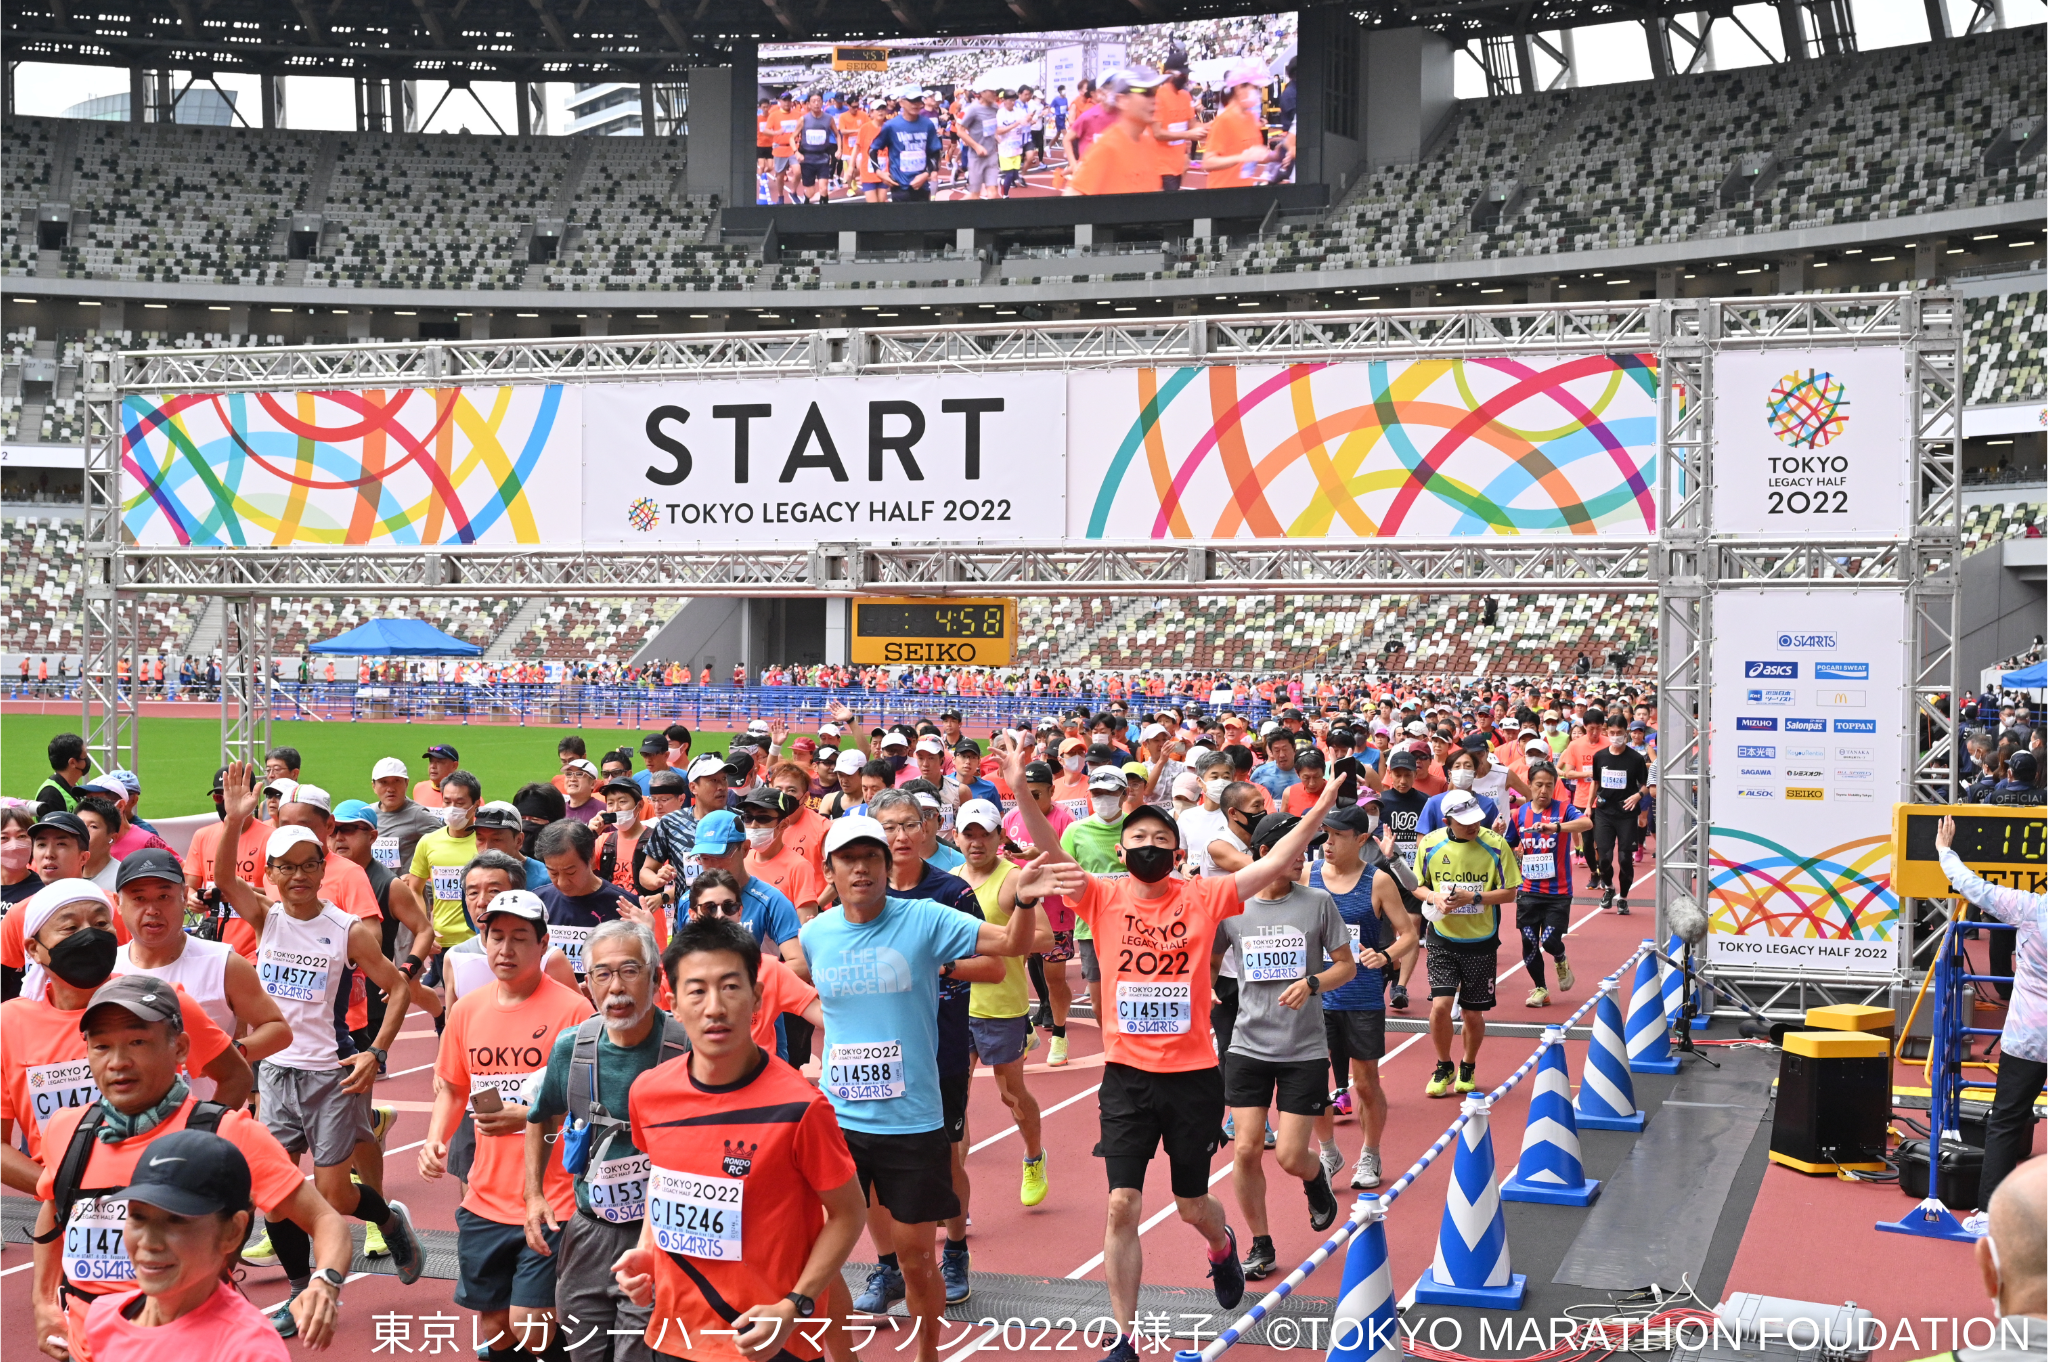 Participating in the Tokyo Legacy Half Marathon 2023 Charity!